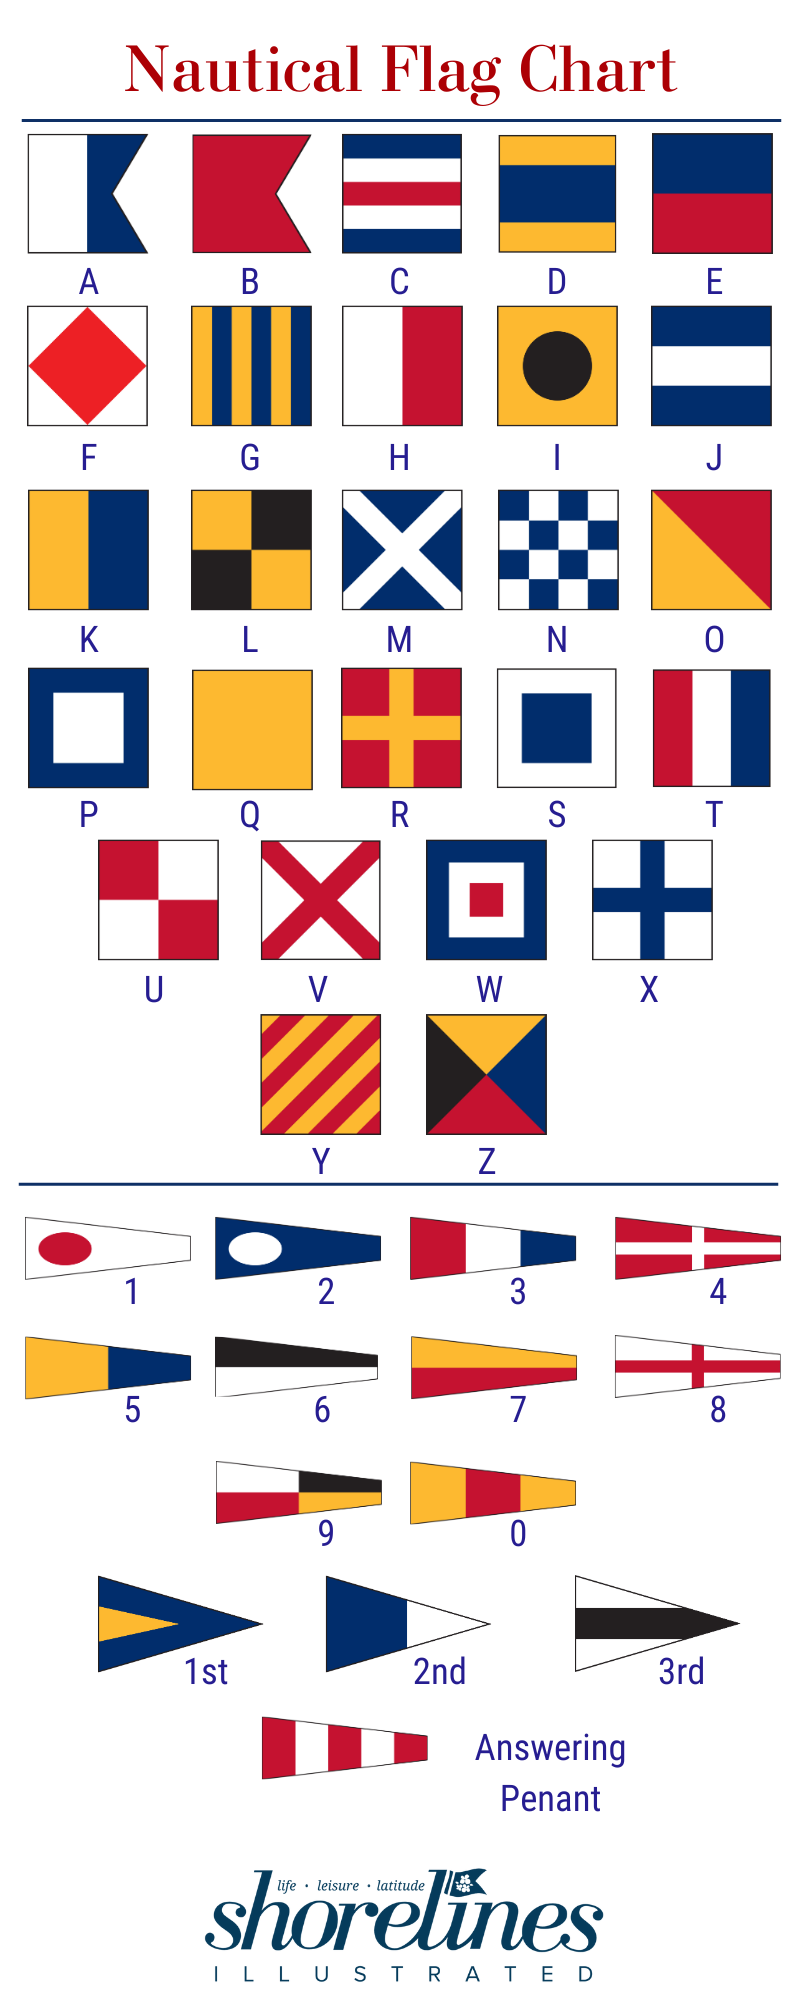 yacht flags meaning